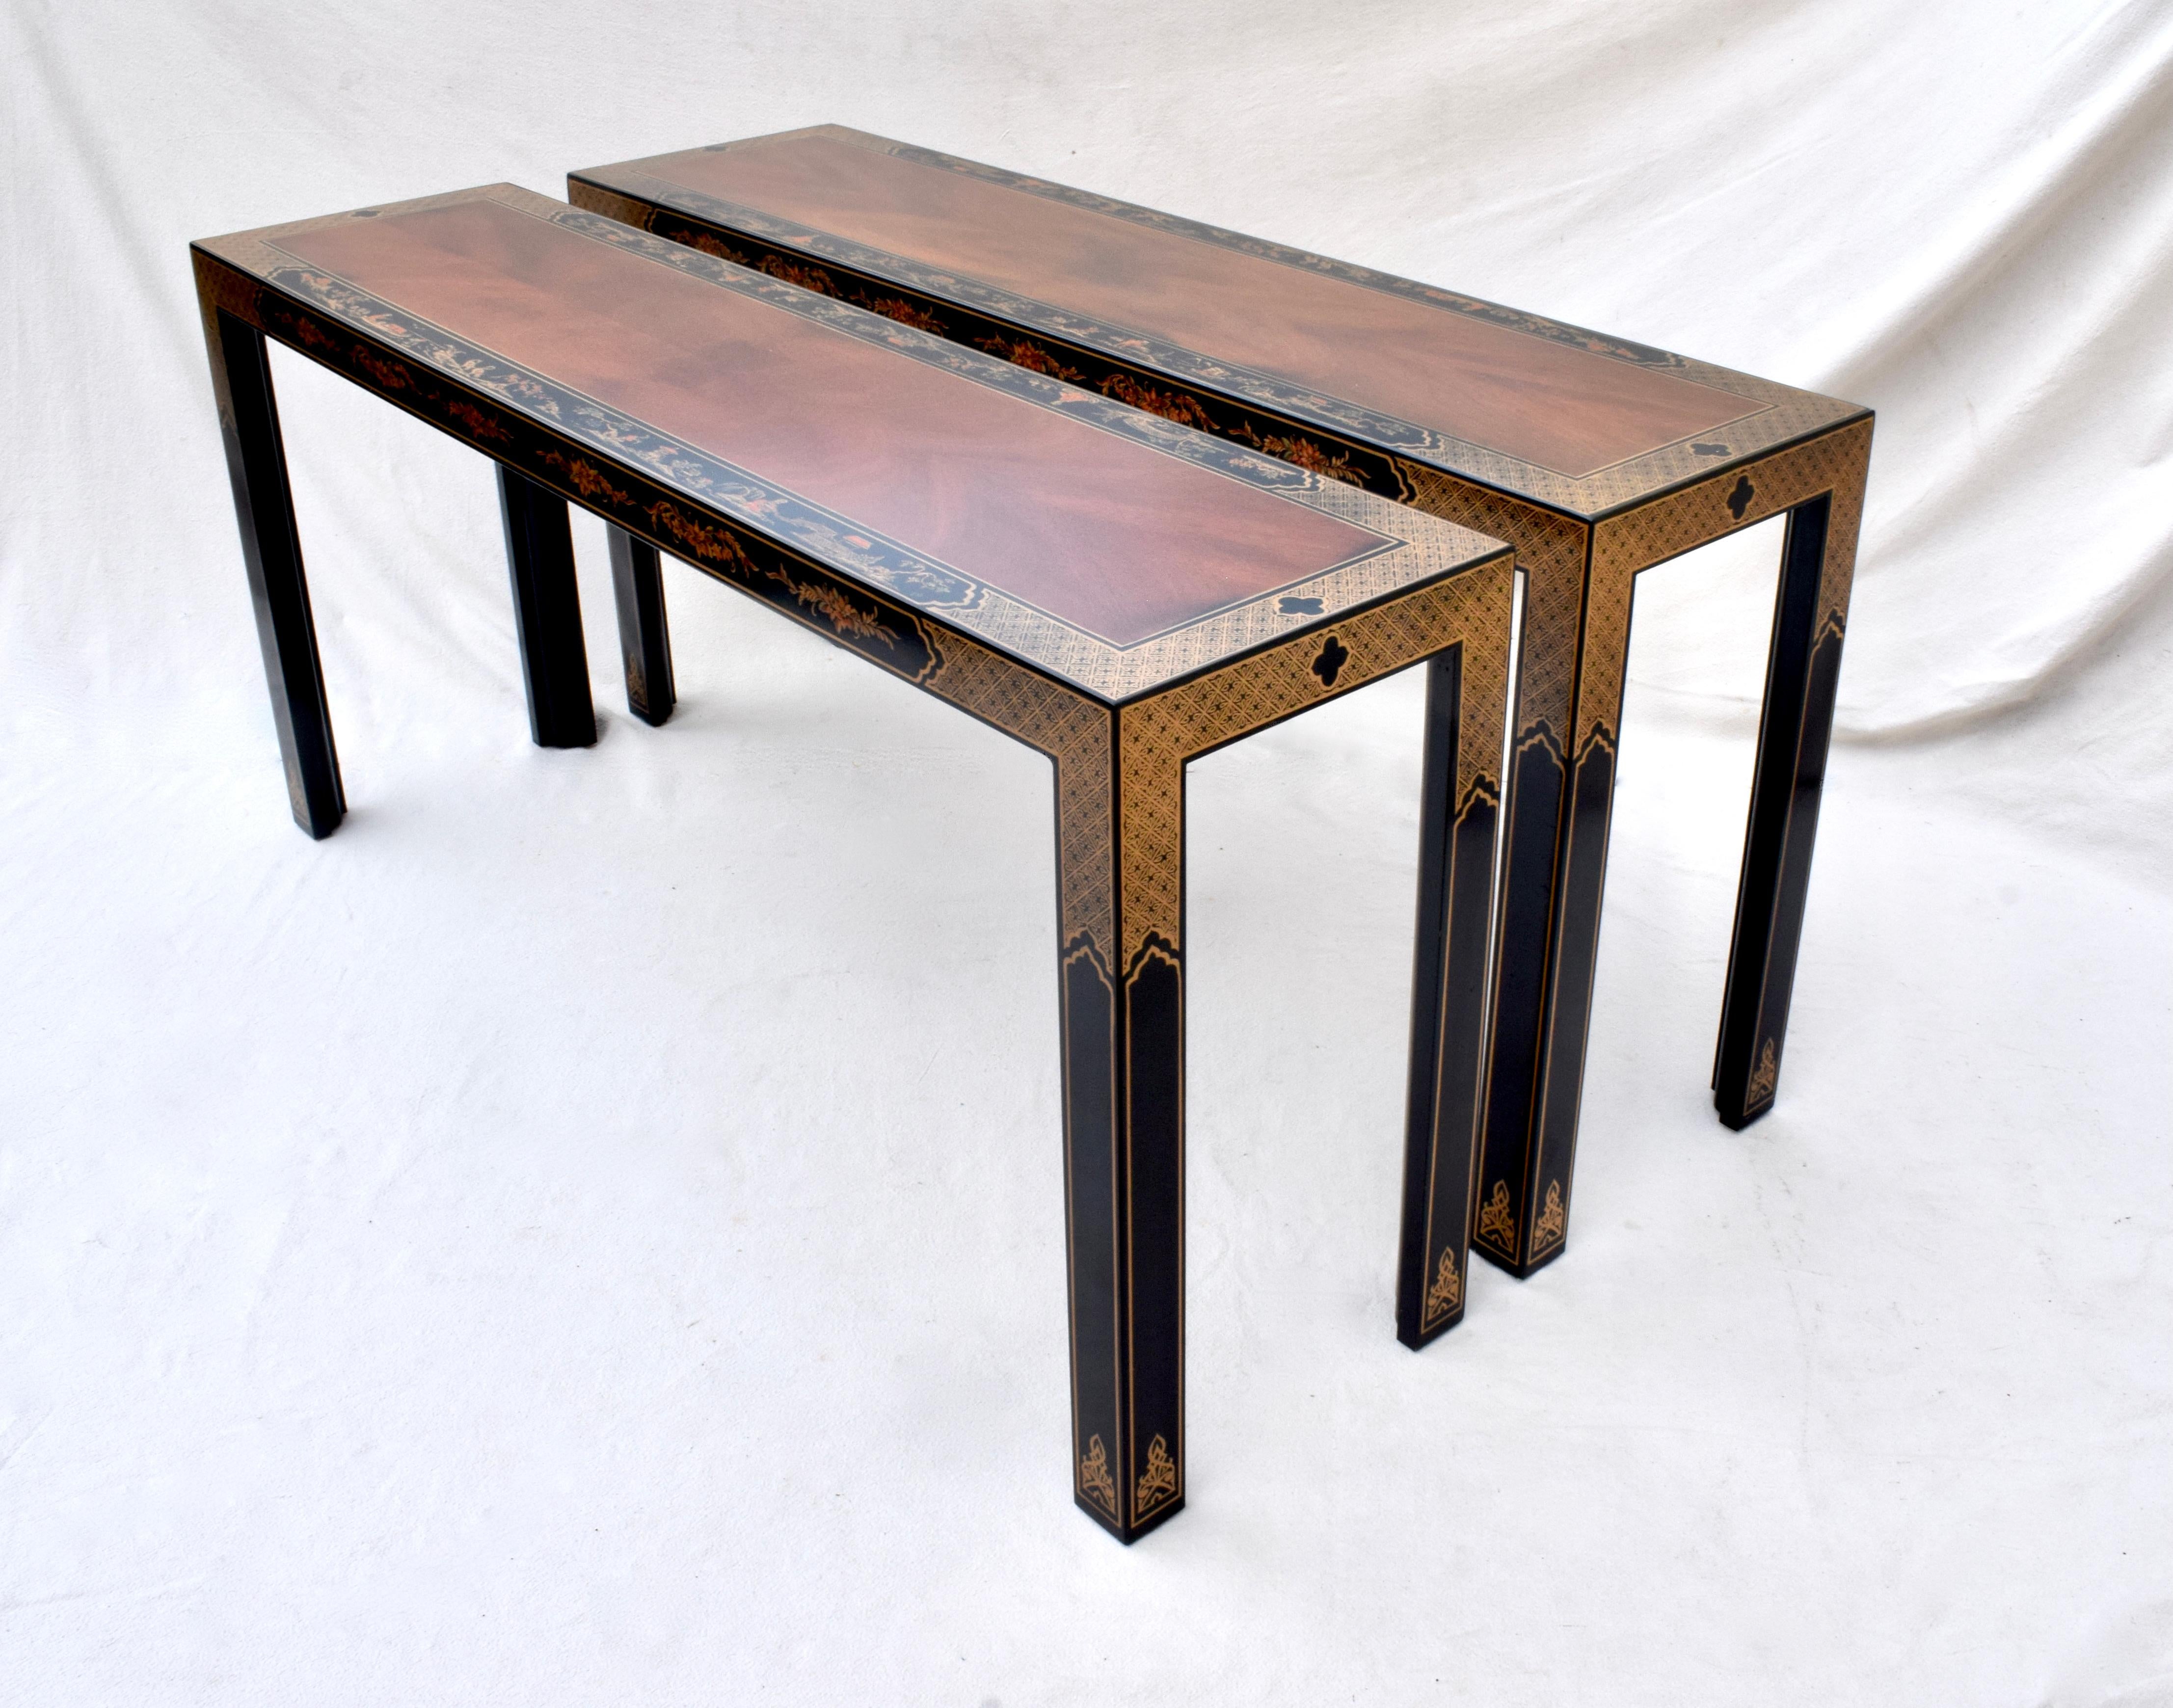 An especially long lithe pair of Asian Modern Parsons console tables by Drexel Heritage. New refinished tops showcase striking fiery Mahogany wood grains & Chinoiserie banded surround. Exquisite as they are or a marvelous candidate for modernizing